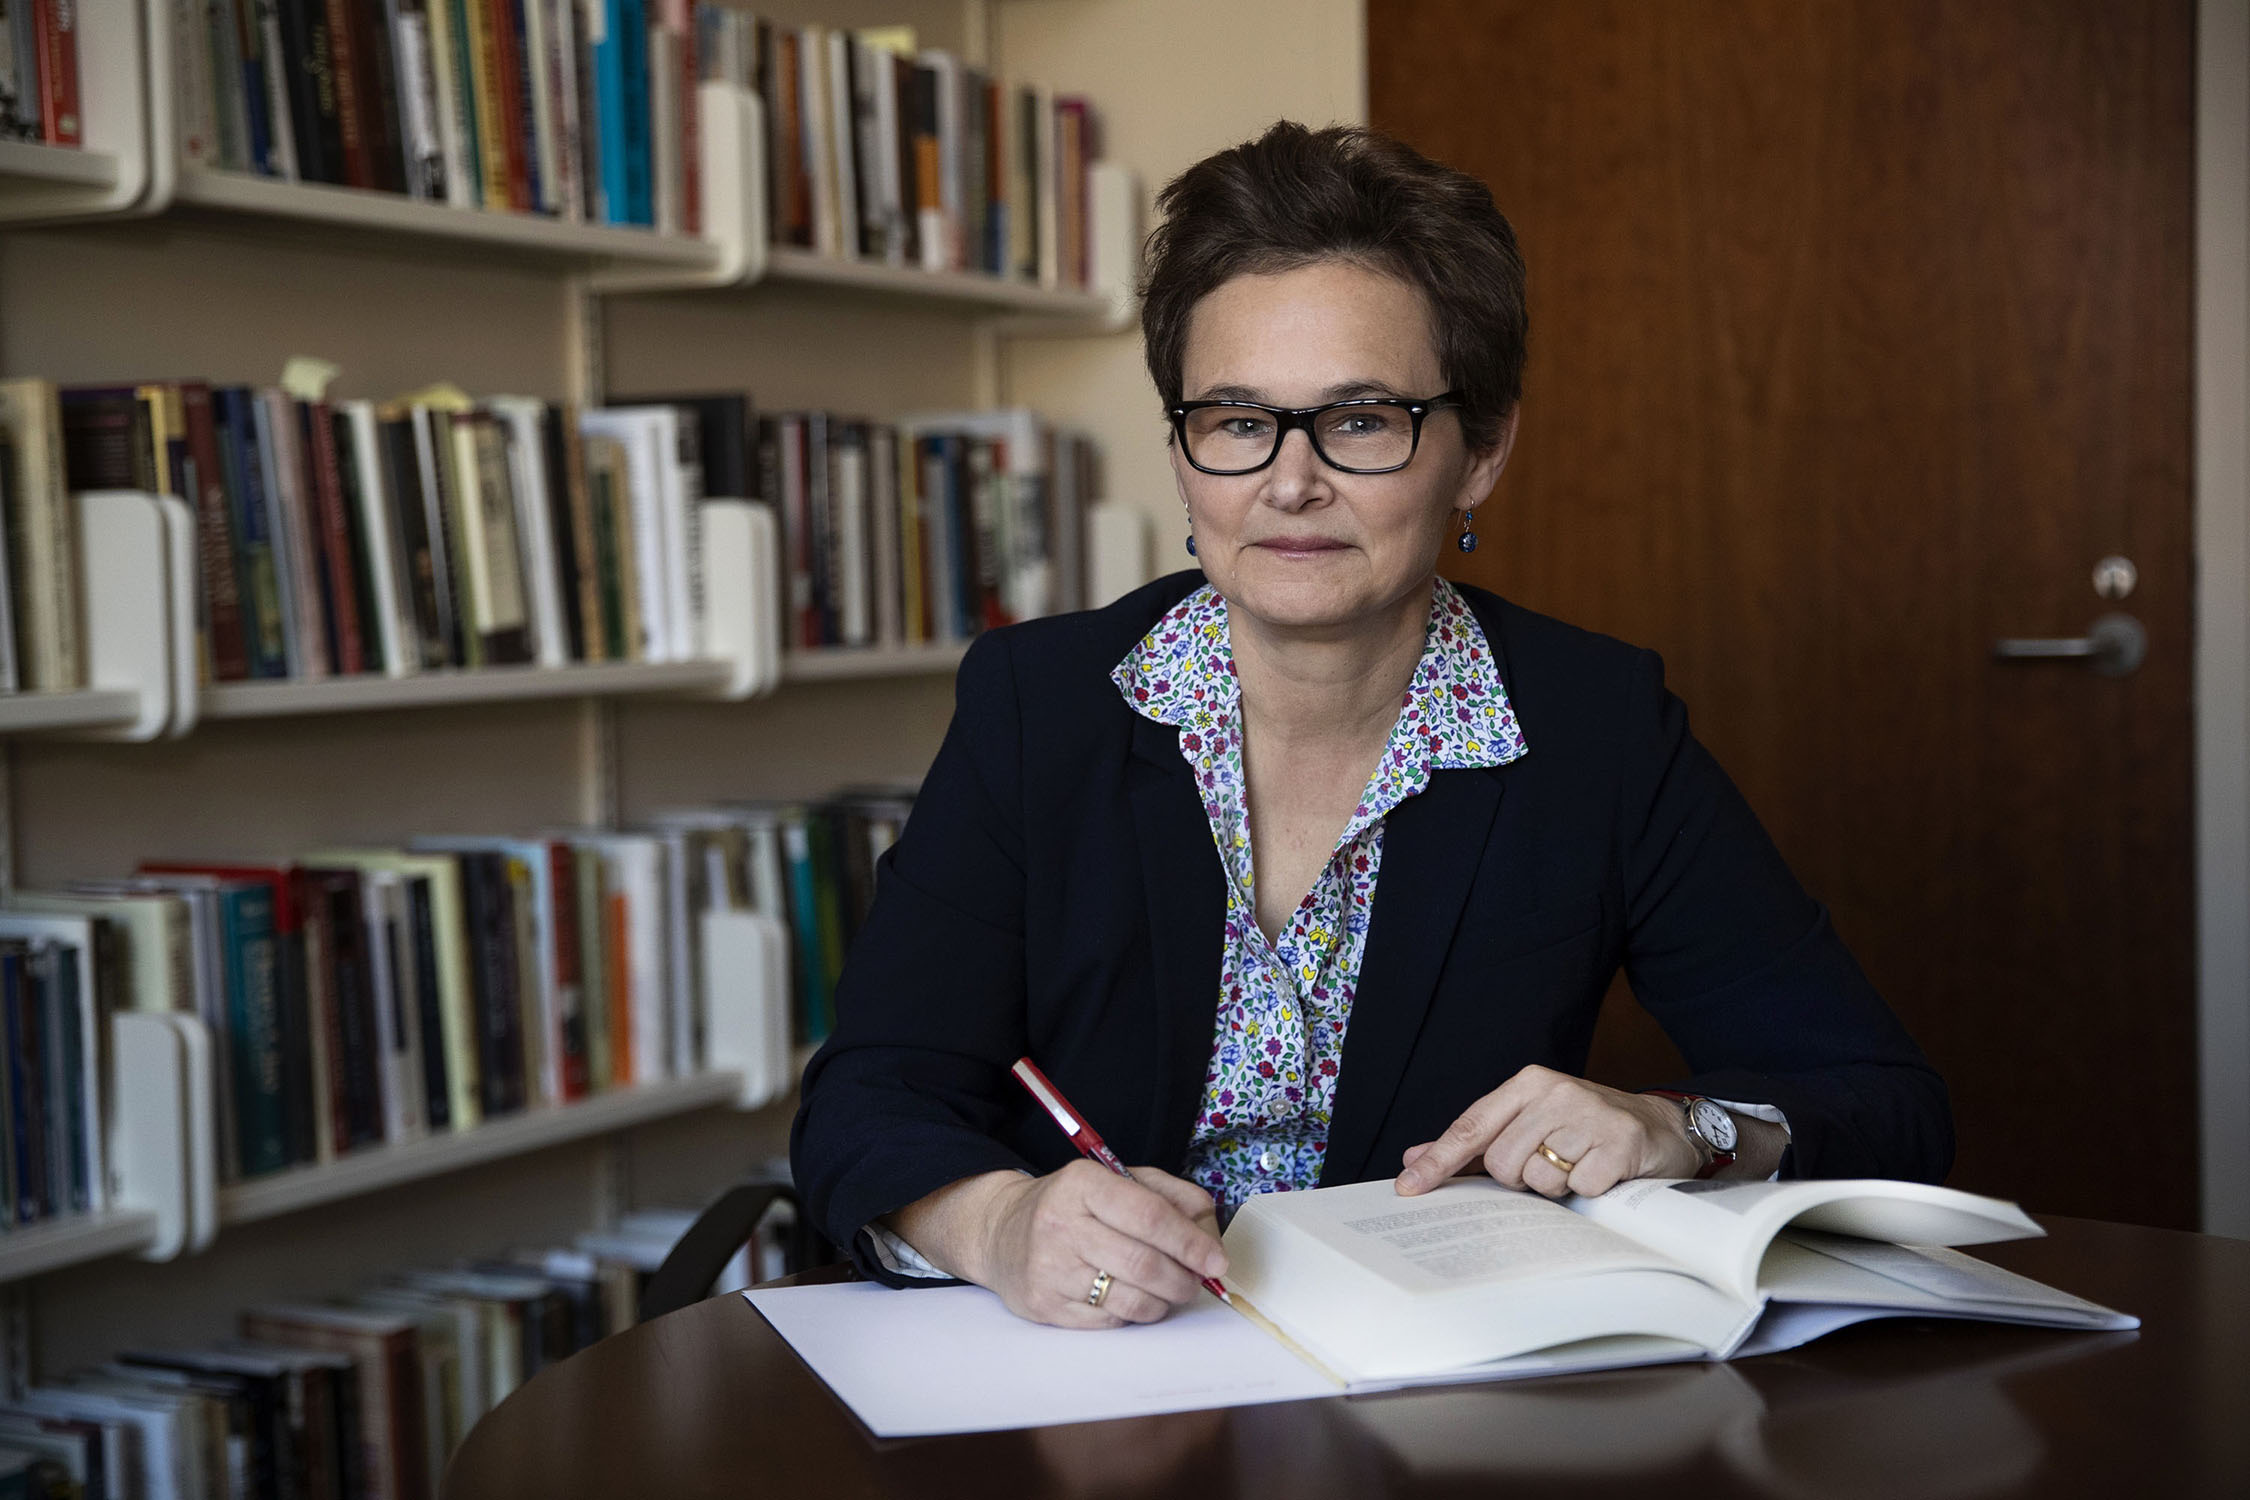 Elizabeth R. Varon is a short-haired woman with glasses, sitting at a table at a library, writing notes next to an open book.